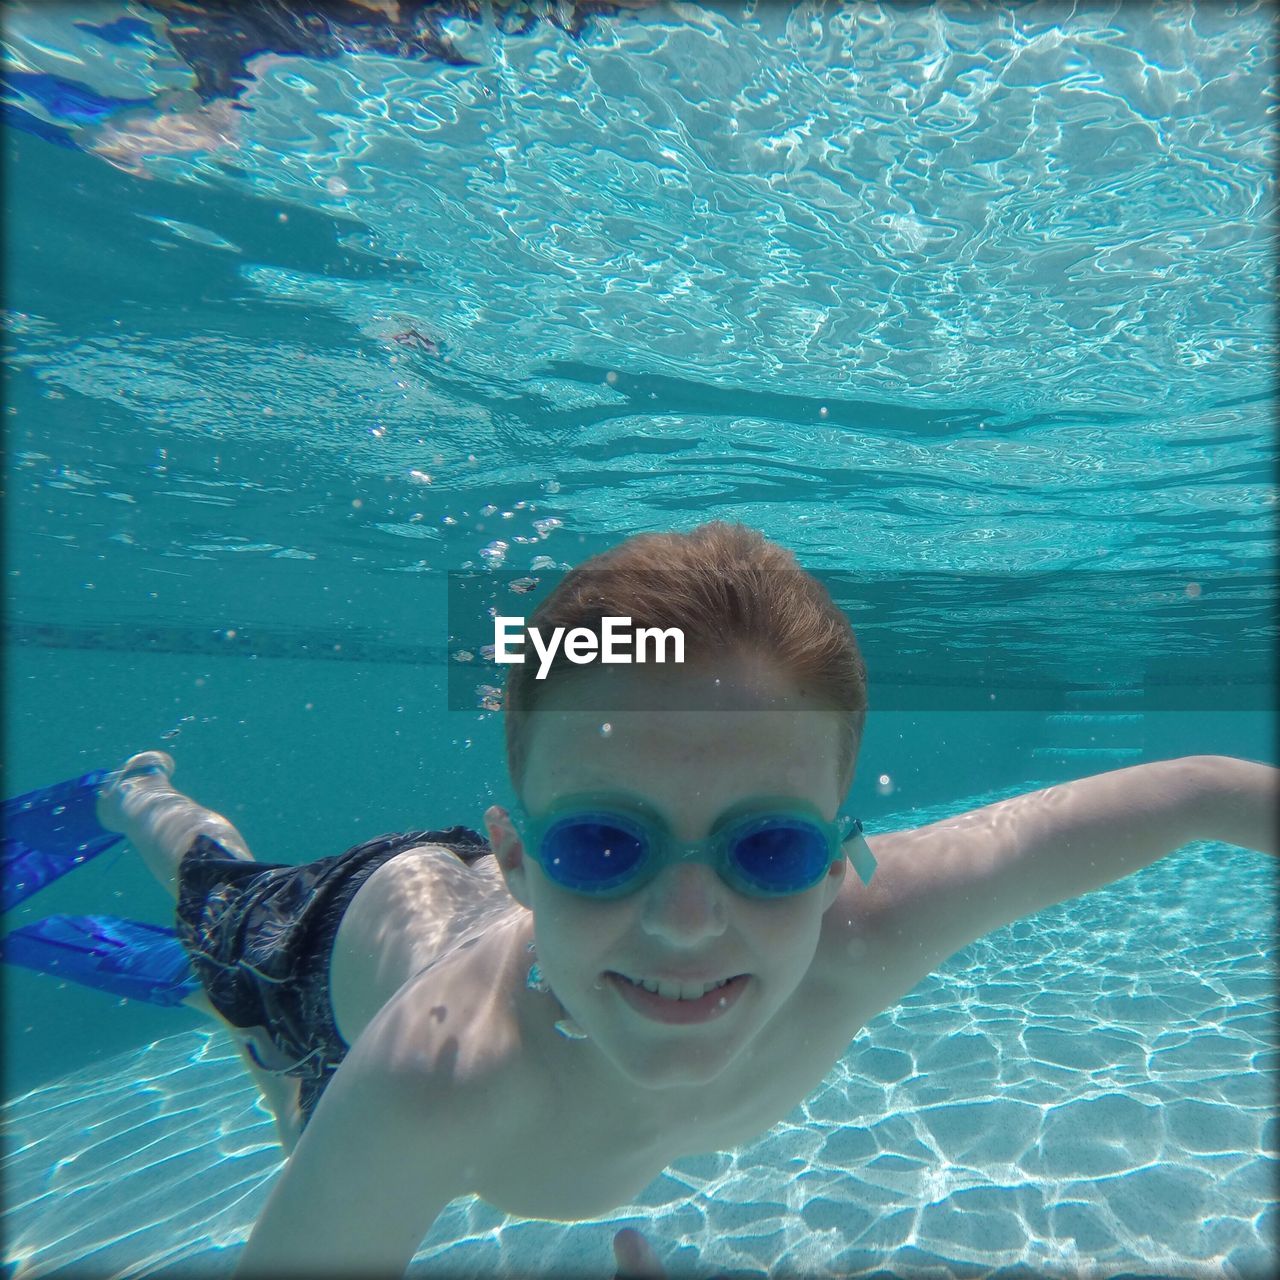 Shirtless boy in goggles swimming in pool